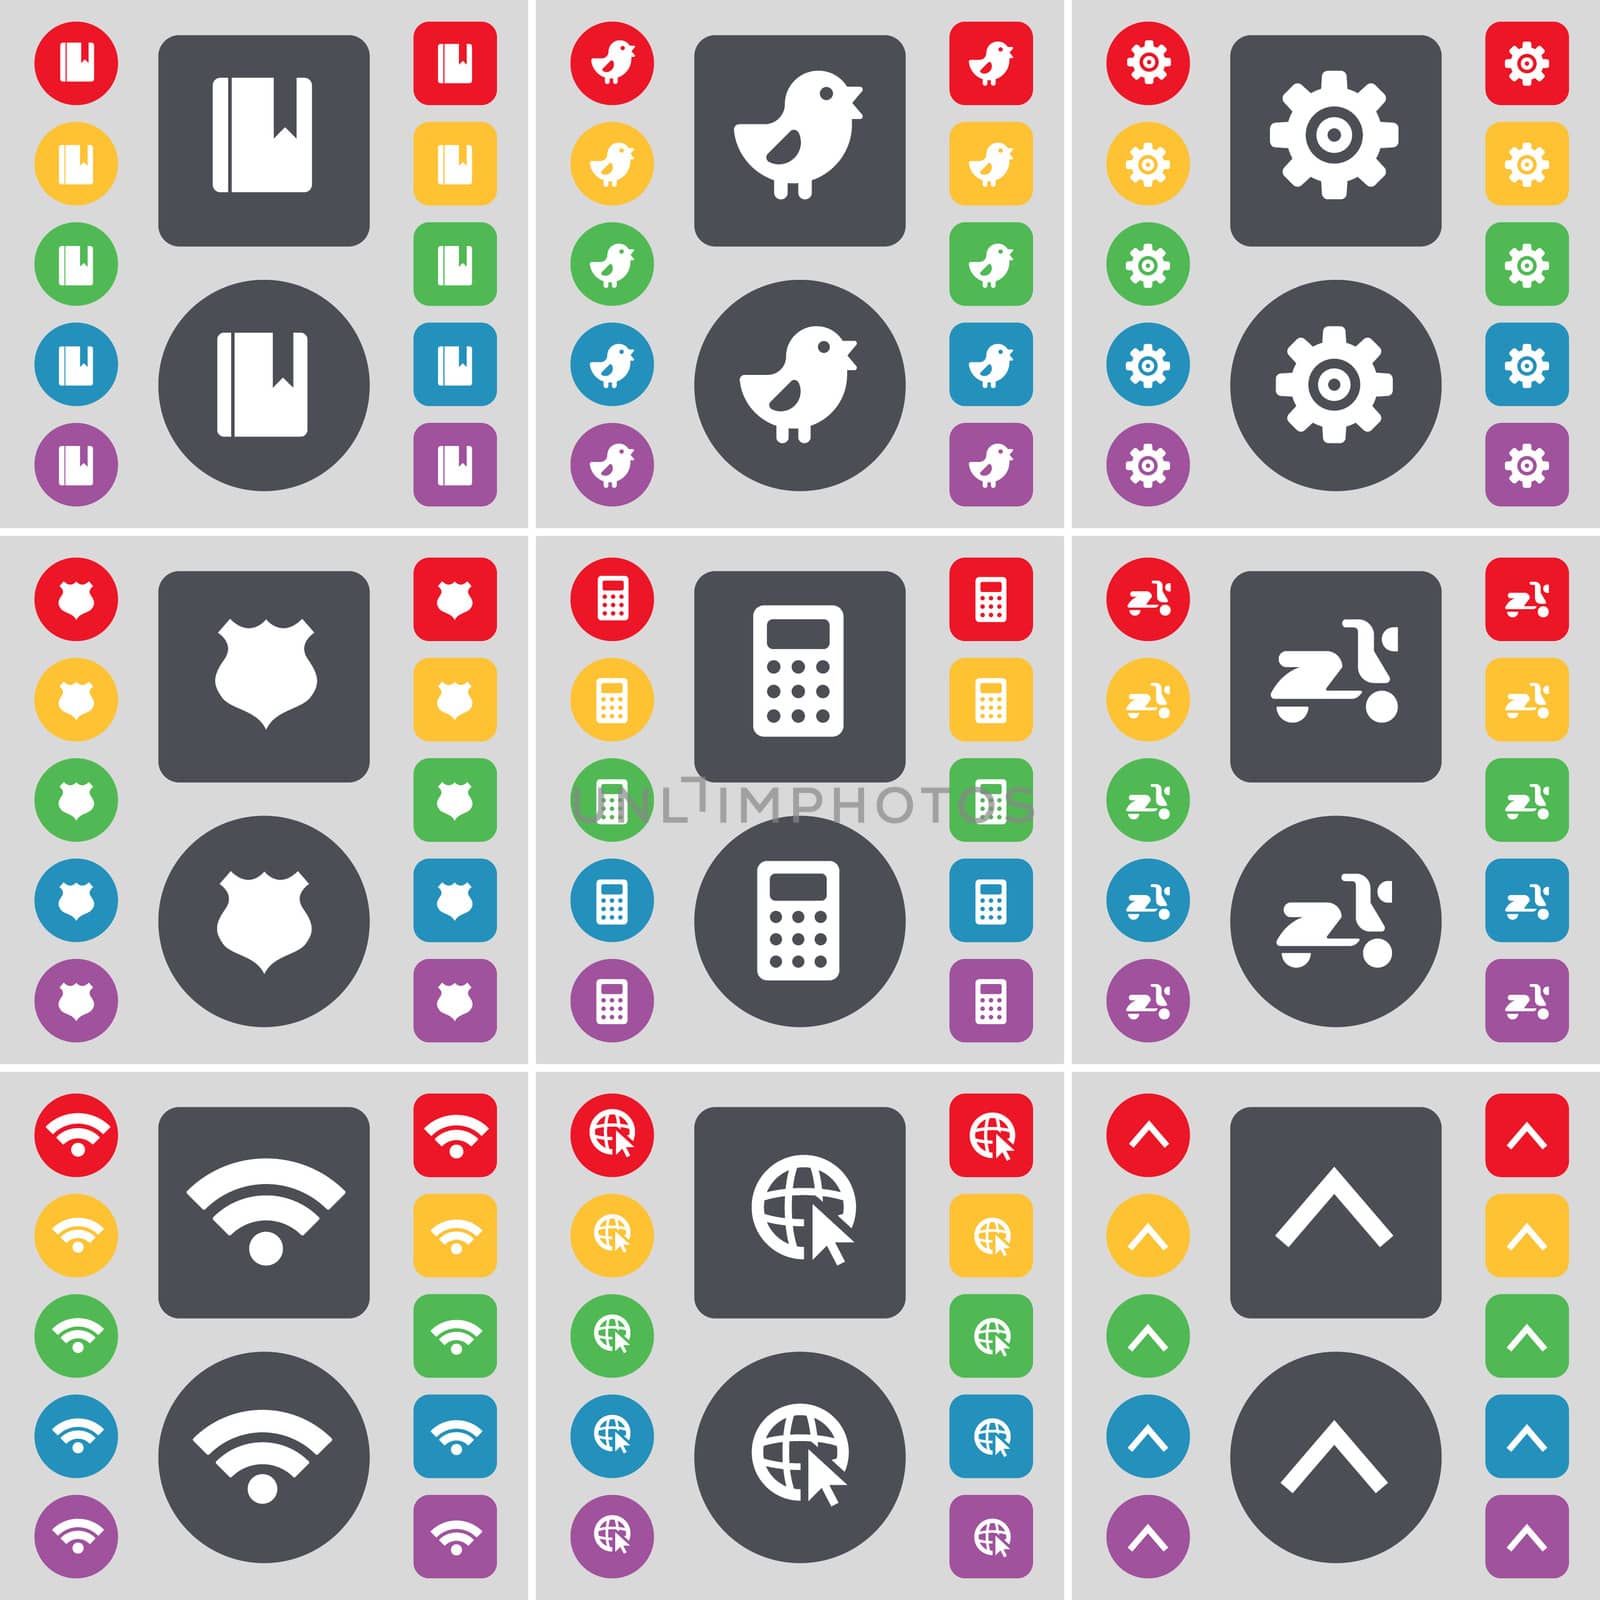 Dictionary, Bird, Gear, Police badge, Calculator, Scooter, Wi-Fi, Web cursor, Arrow up icon symbol. A large set of flat, colored buttons for your design. illustration